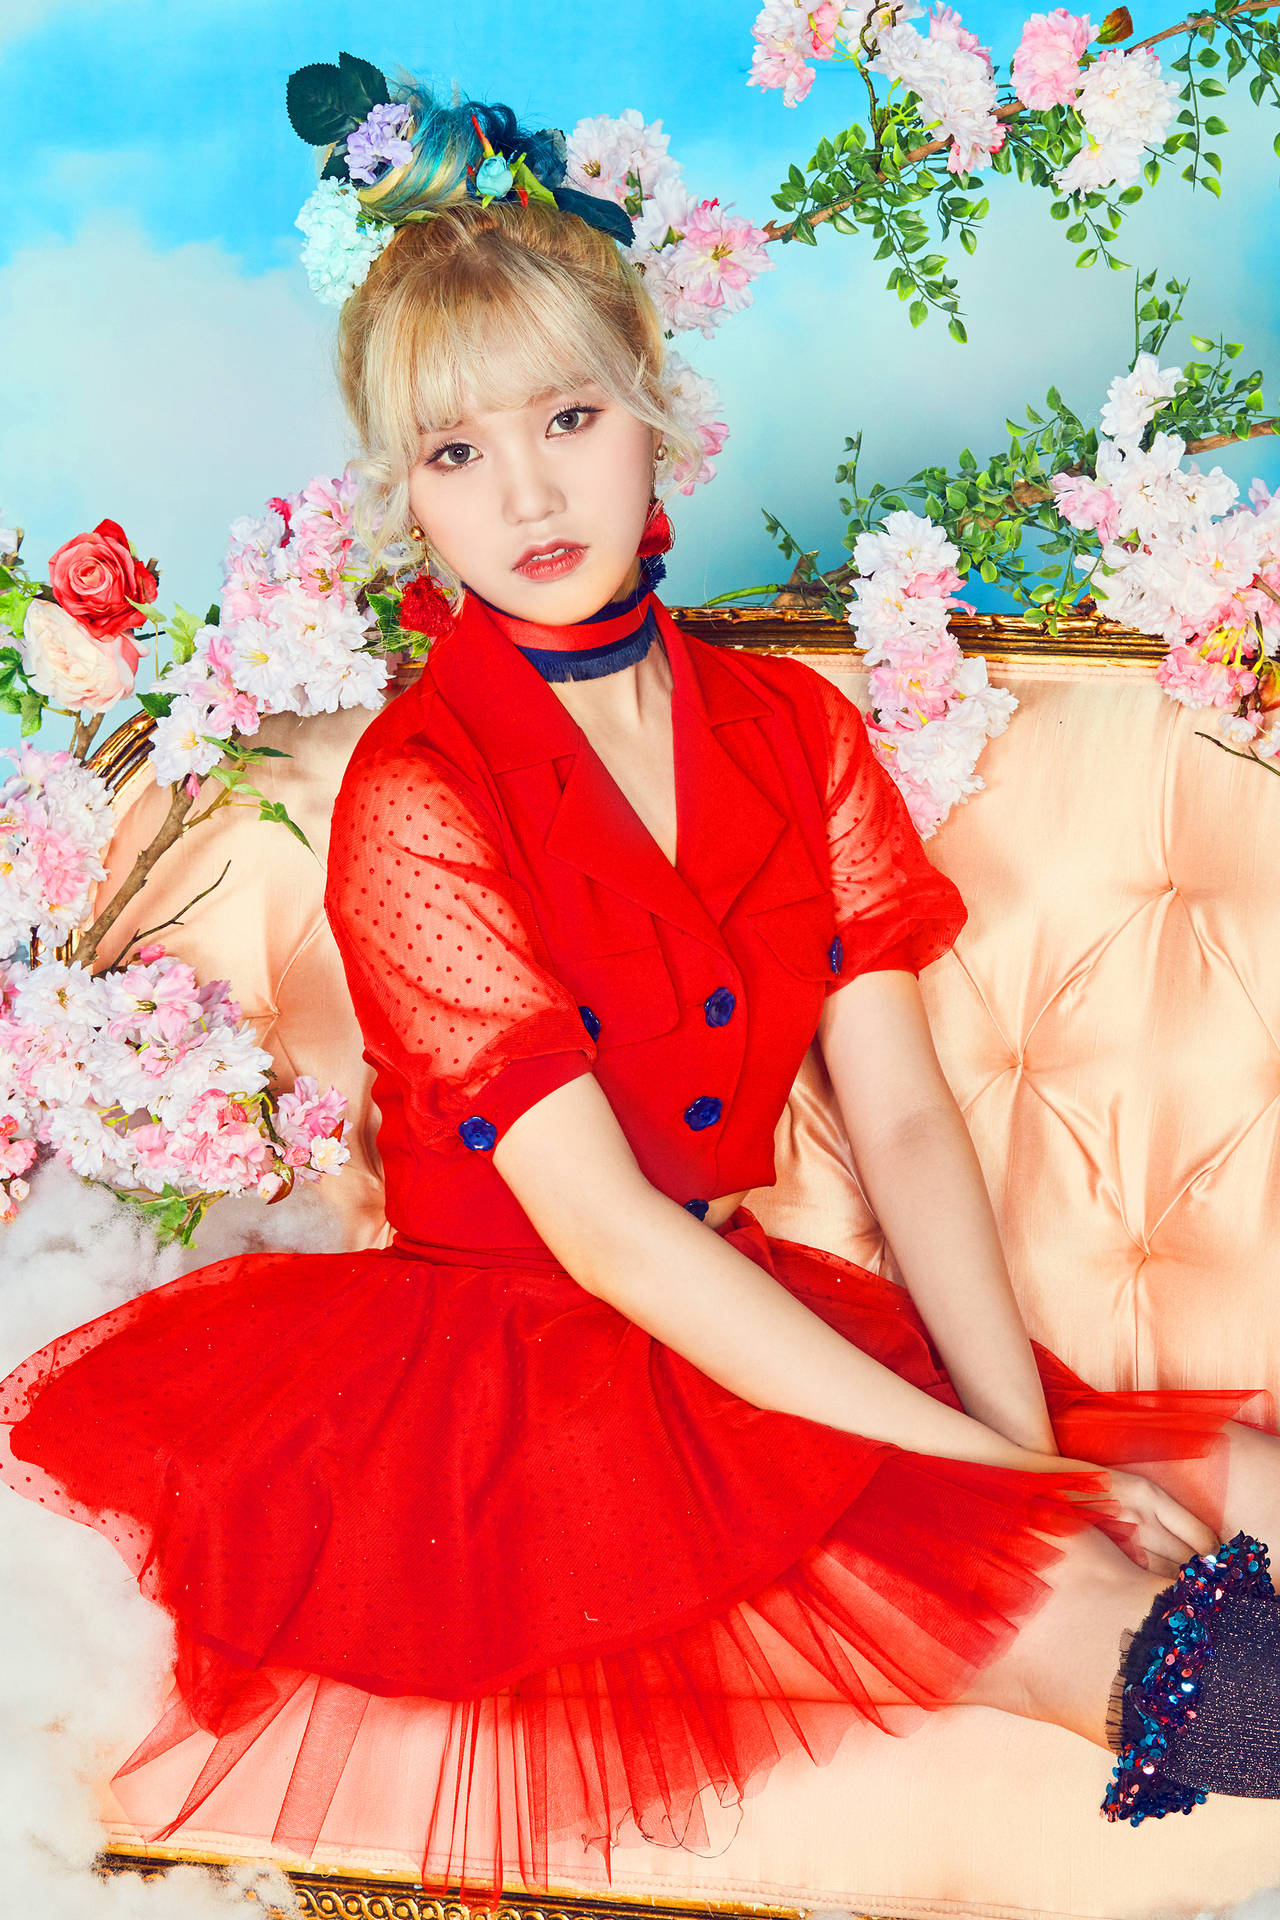 Oh My Girl Mimi In Red